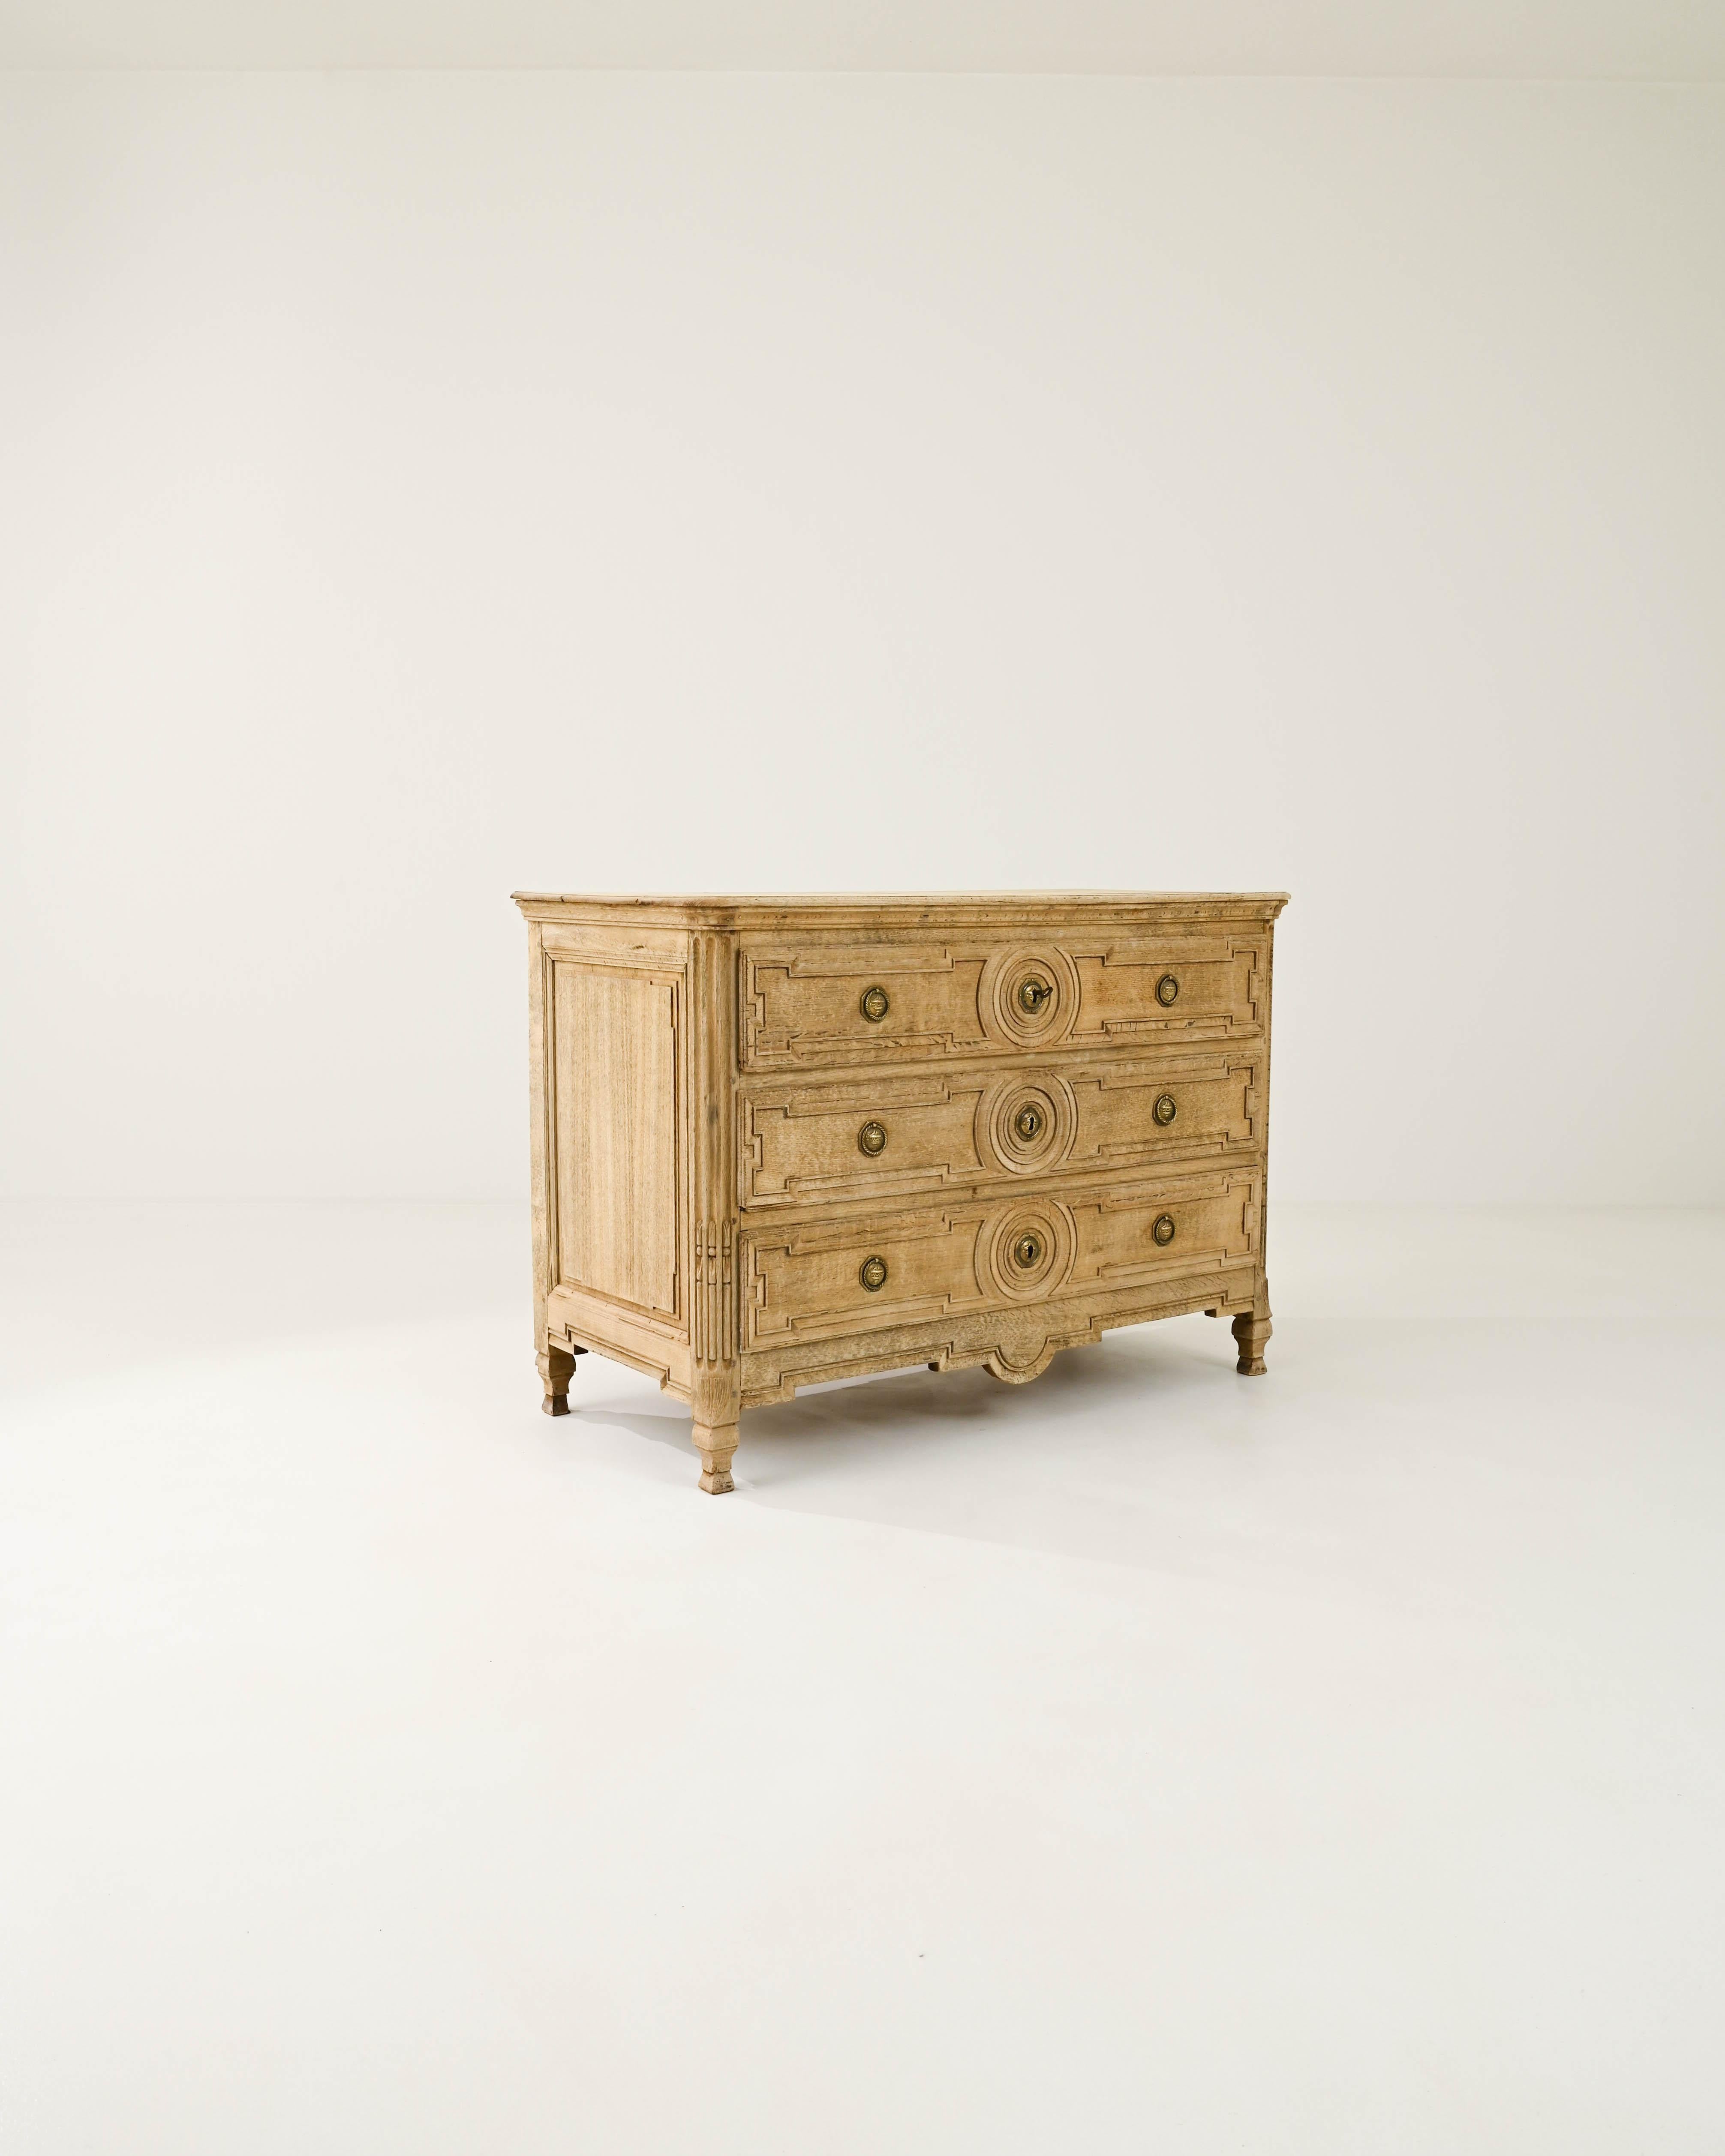 Graceful and refined, this antique chest of drawers offers a Neoclassical design in natural oak. Hand-built in France in the early 1800s, the paneling of the drawers is precise and geometric; a circular motif in the center of each panel creates a